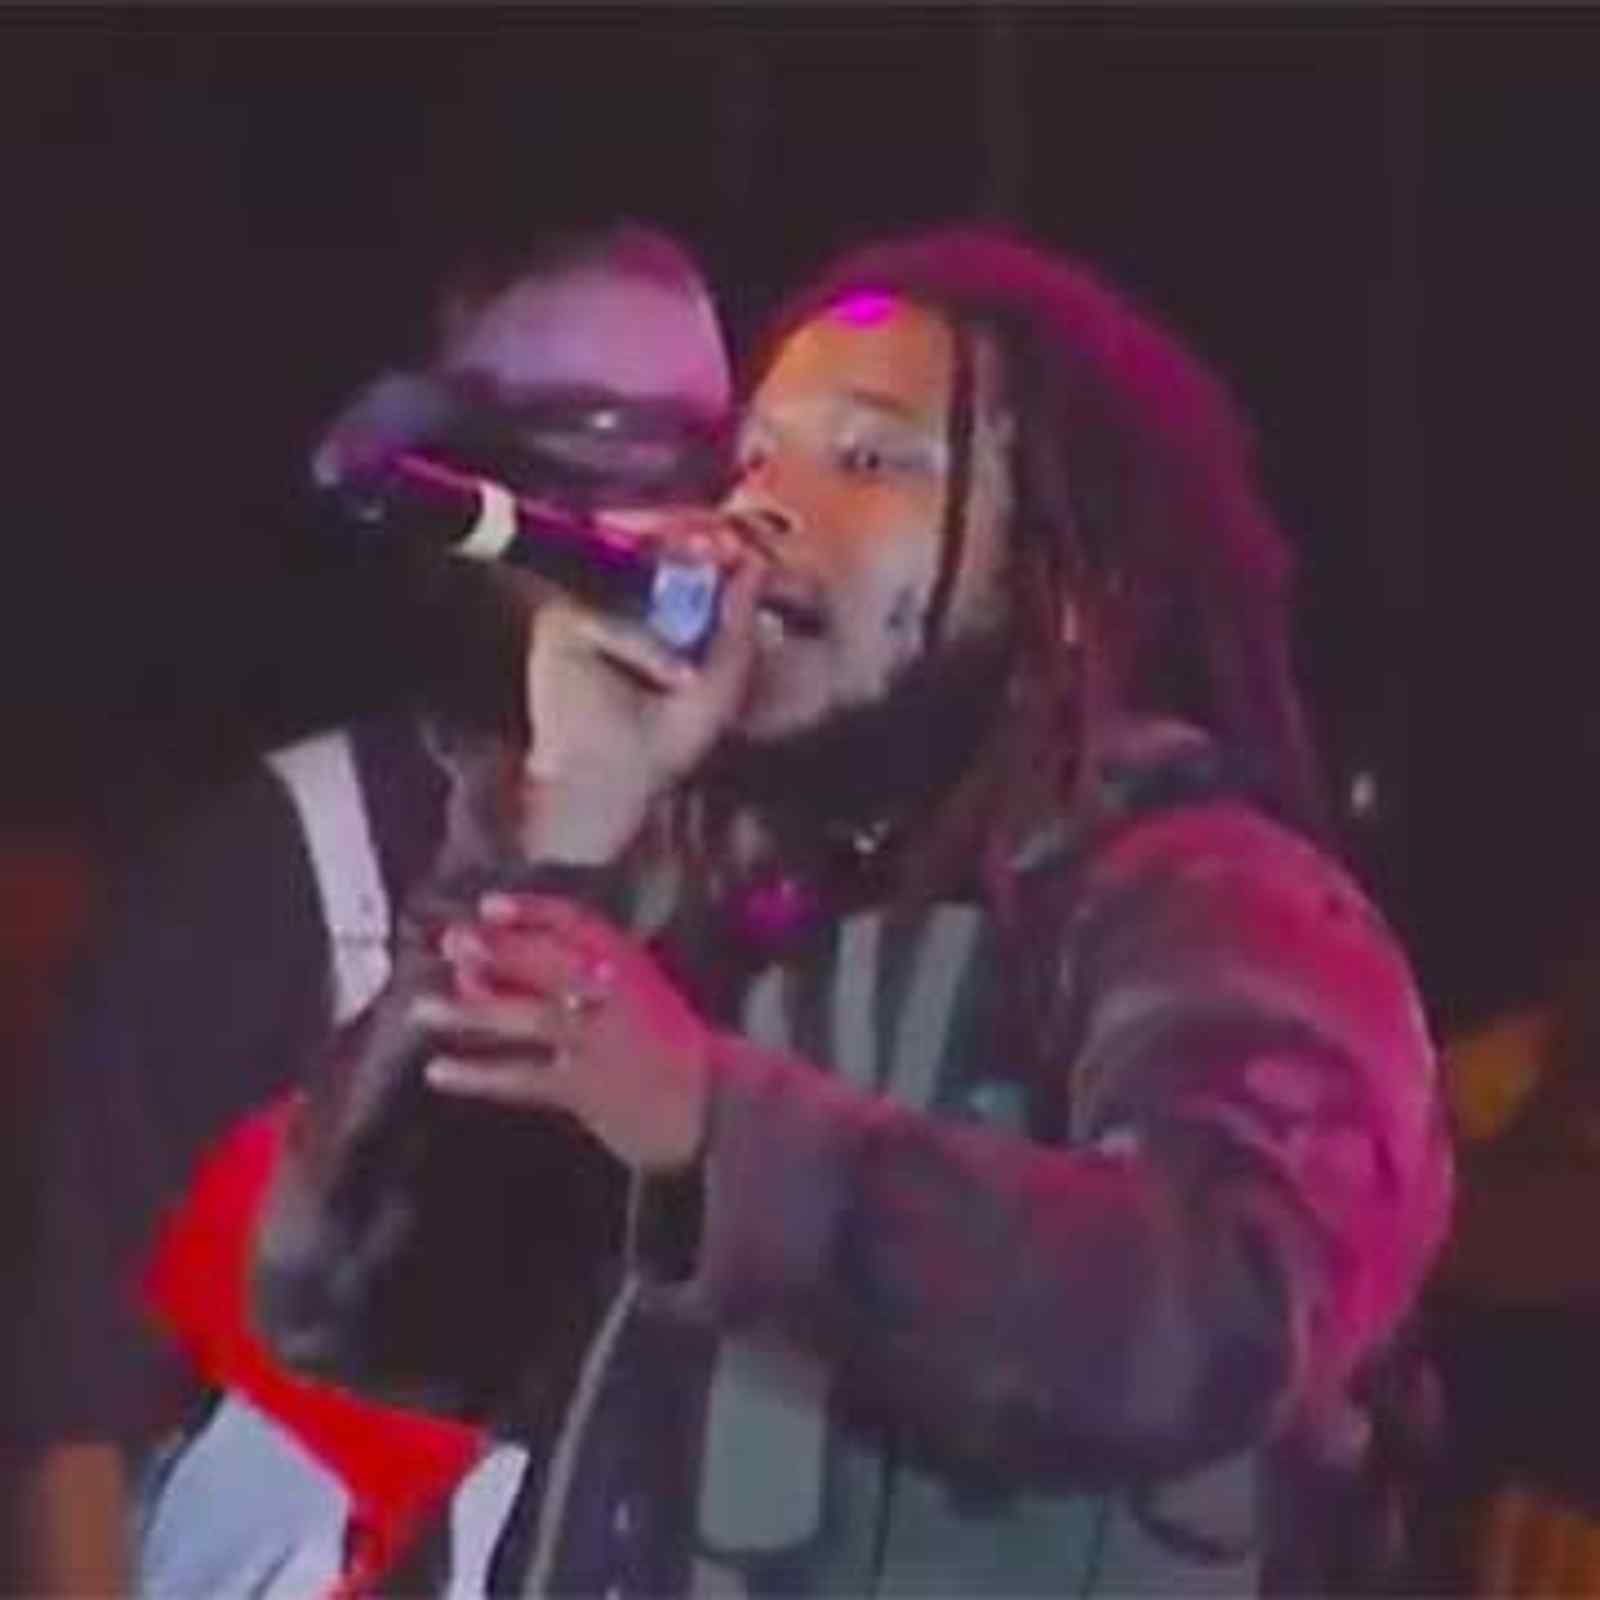 Stephen performs with the Marley Brothers at Smile Jamaica